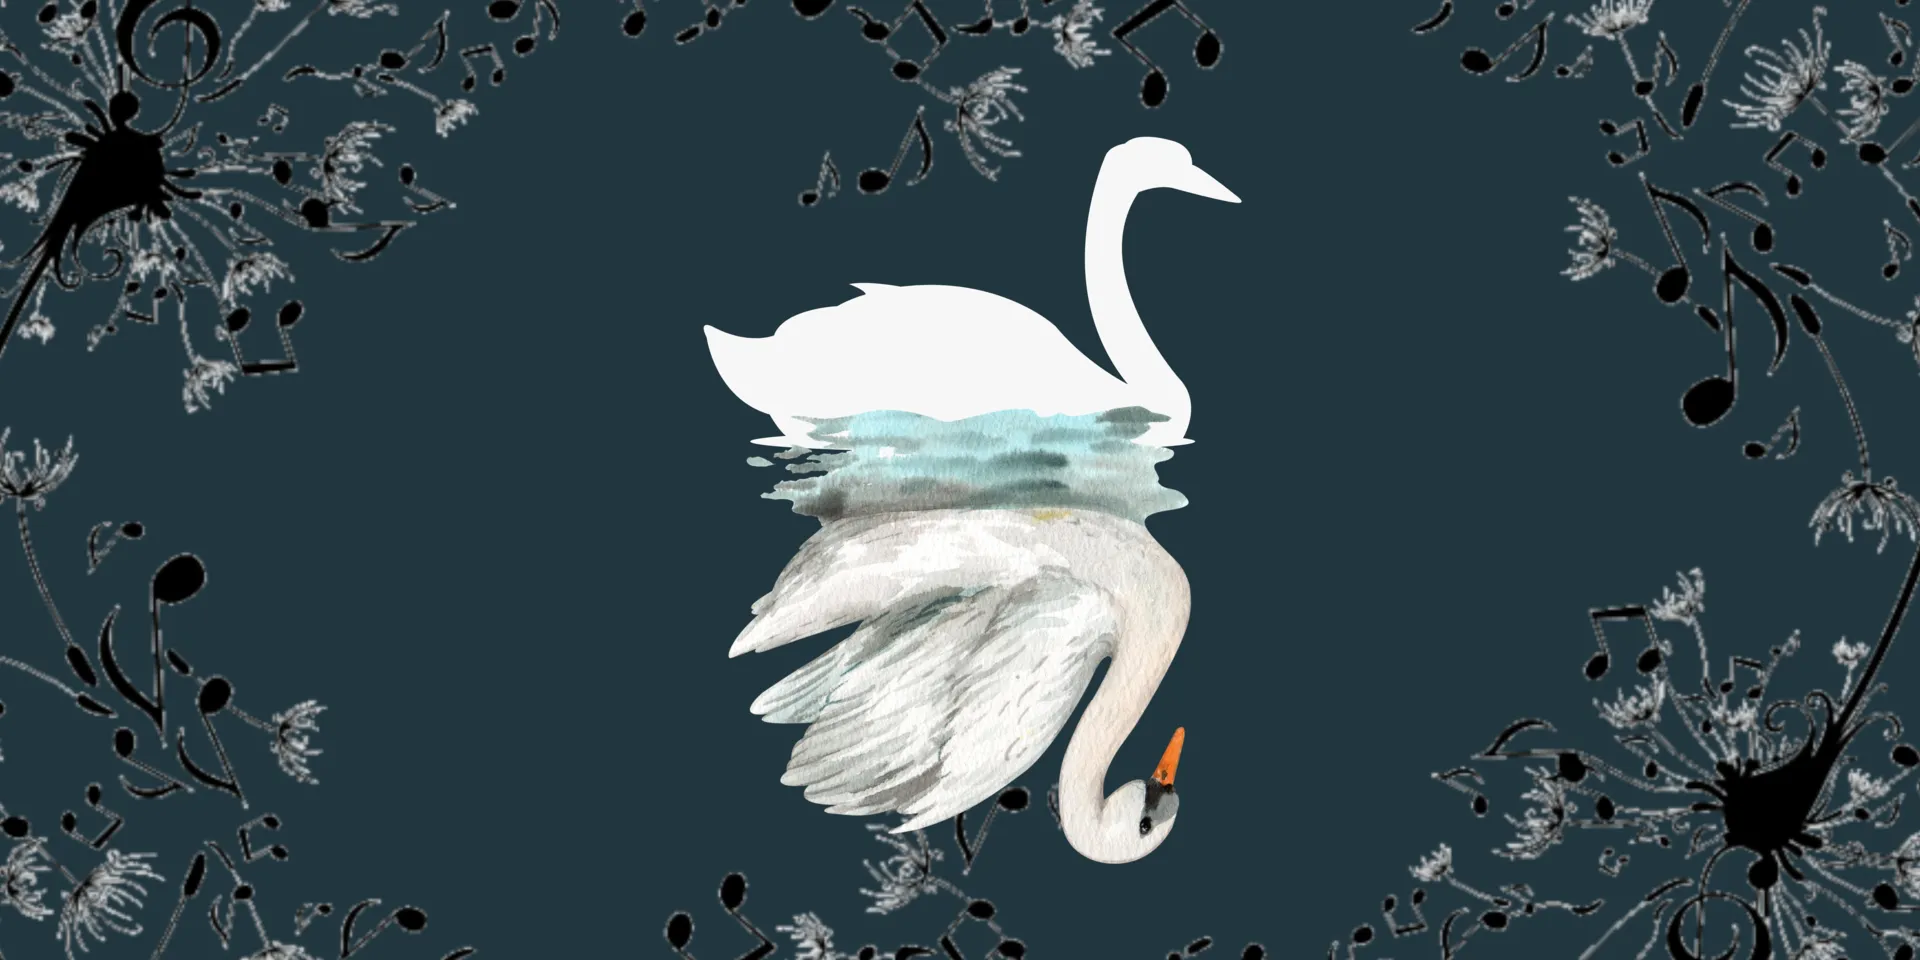 For you, on December 20, '22! The Swan Sees His Reflection